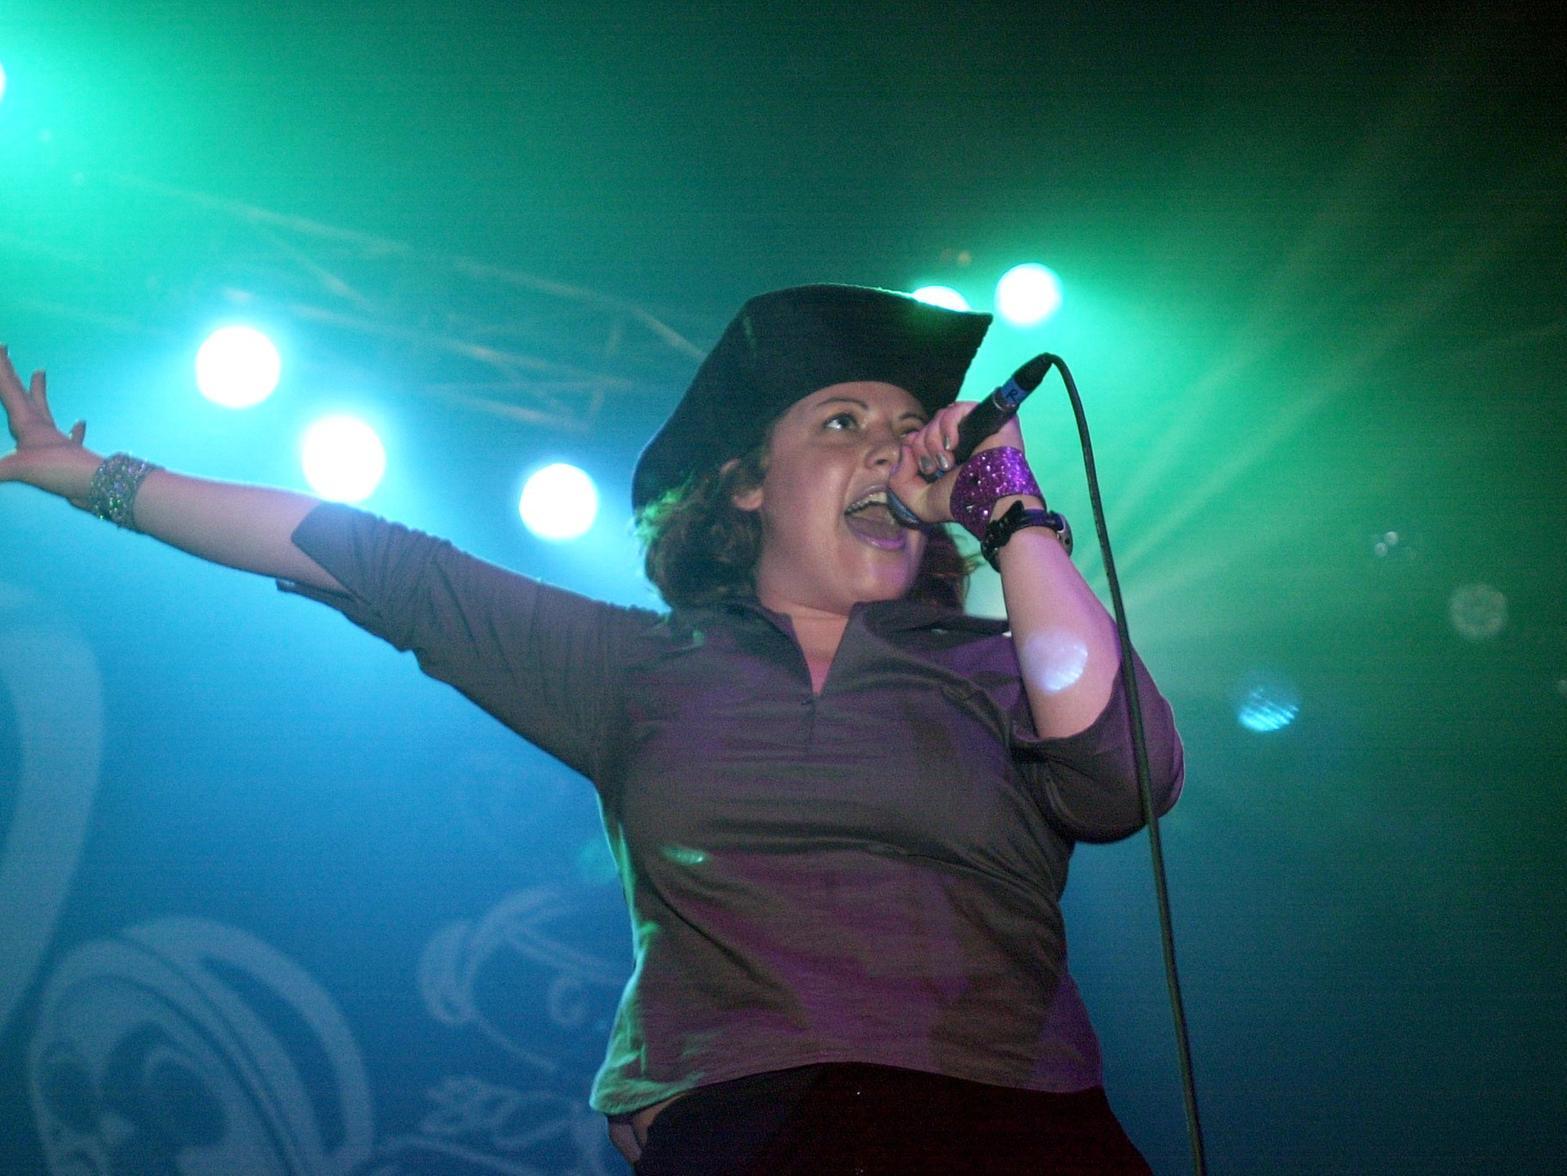 This is Vicky Larder, lead vocals with band Wyde.